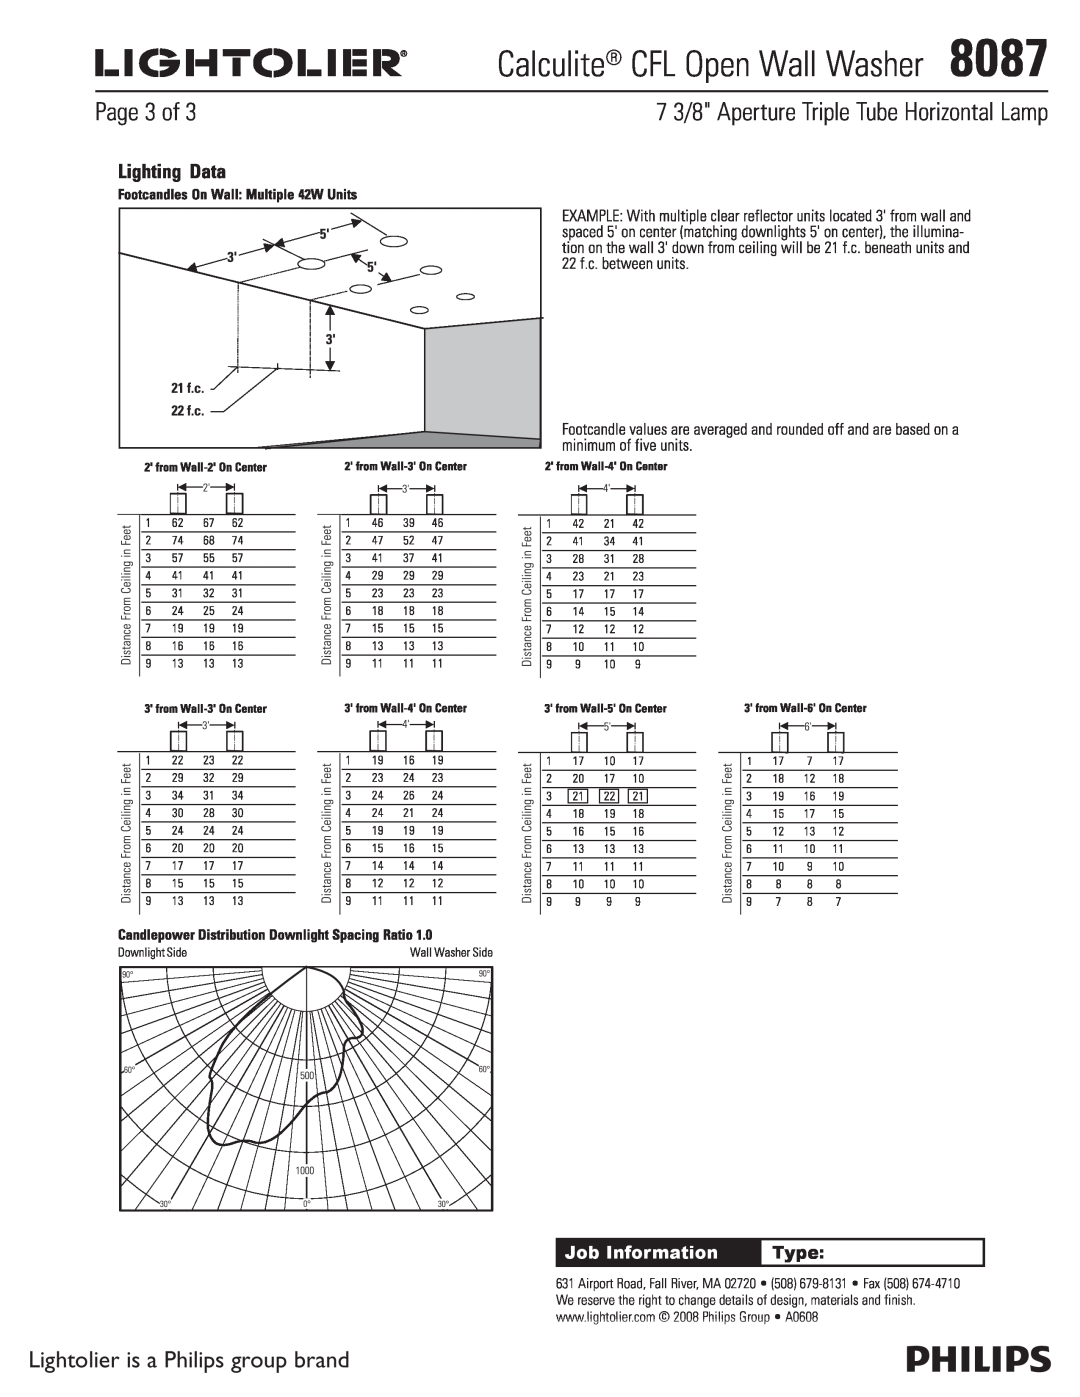 Lightolier Page 3 of, Calculite CFL Open Wall Washer8087, Lightolier is a Philips group brand, Job Information, Type 